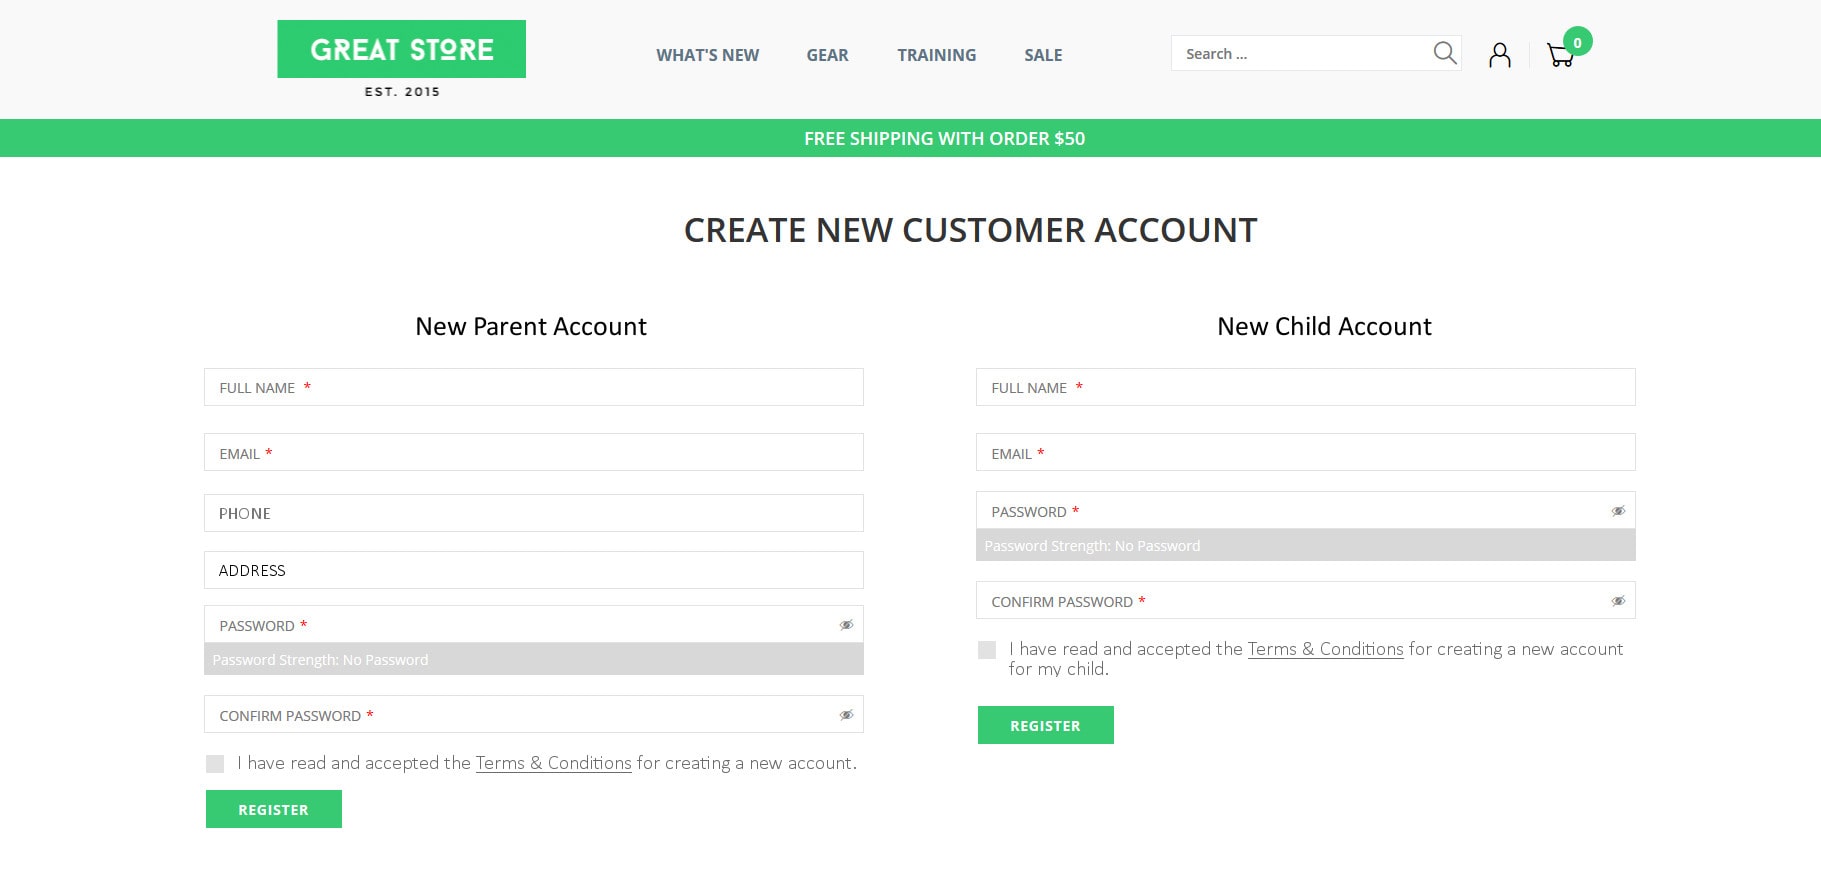 Creating different account types for parents and children can be one way to help with COPPA Compliance in Magento.